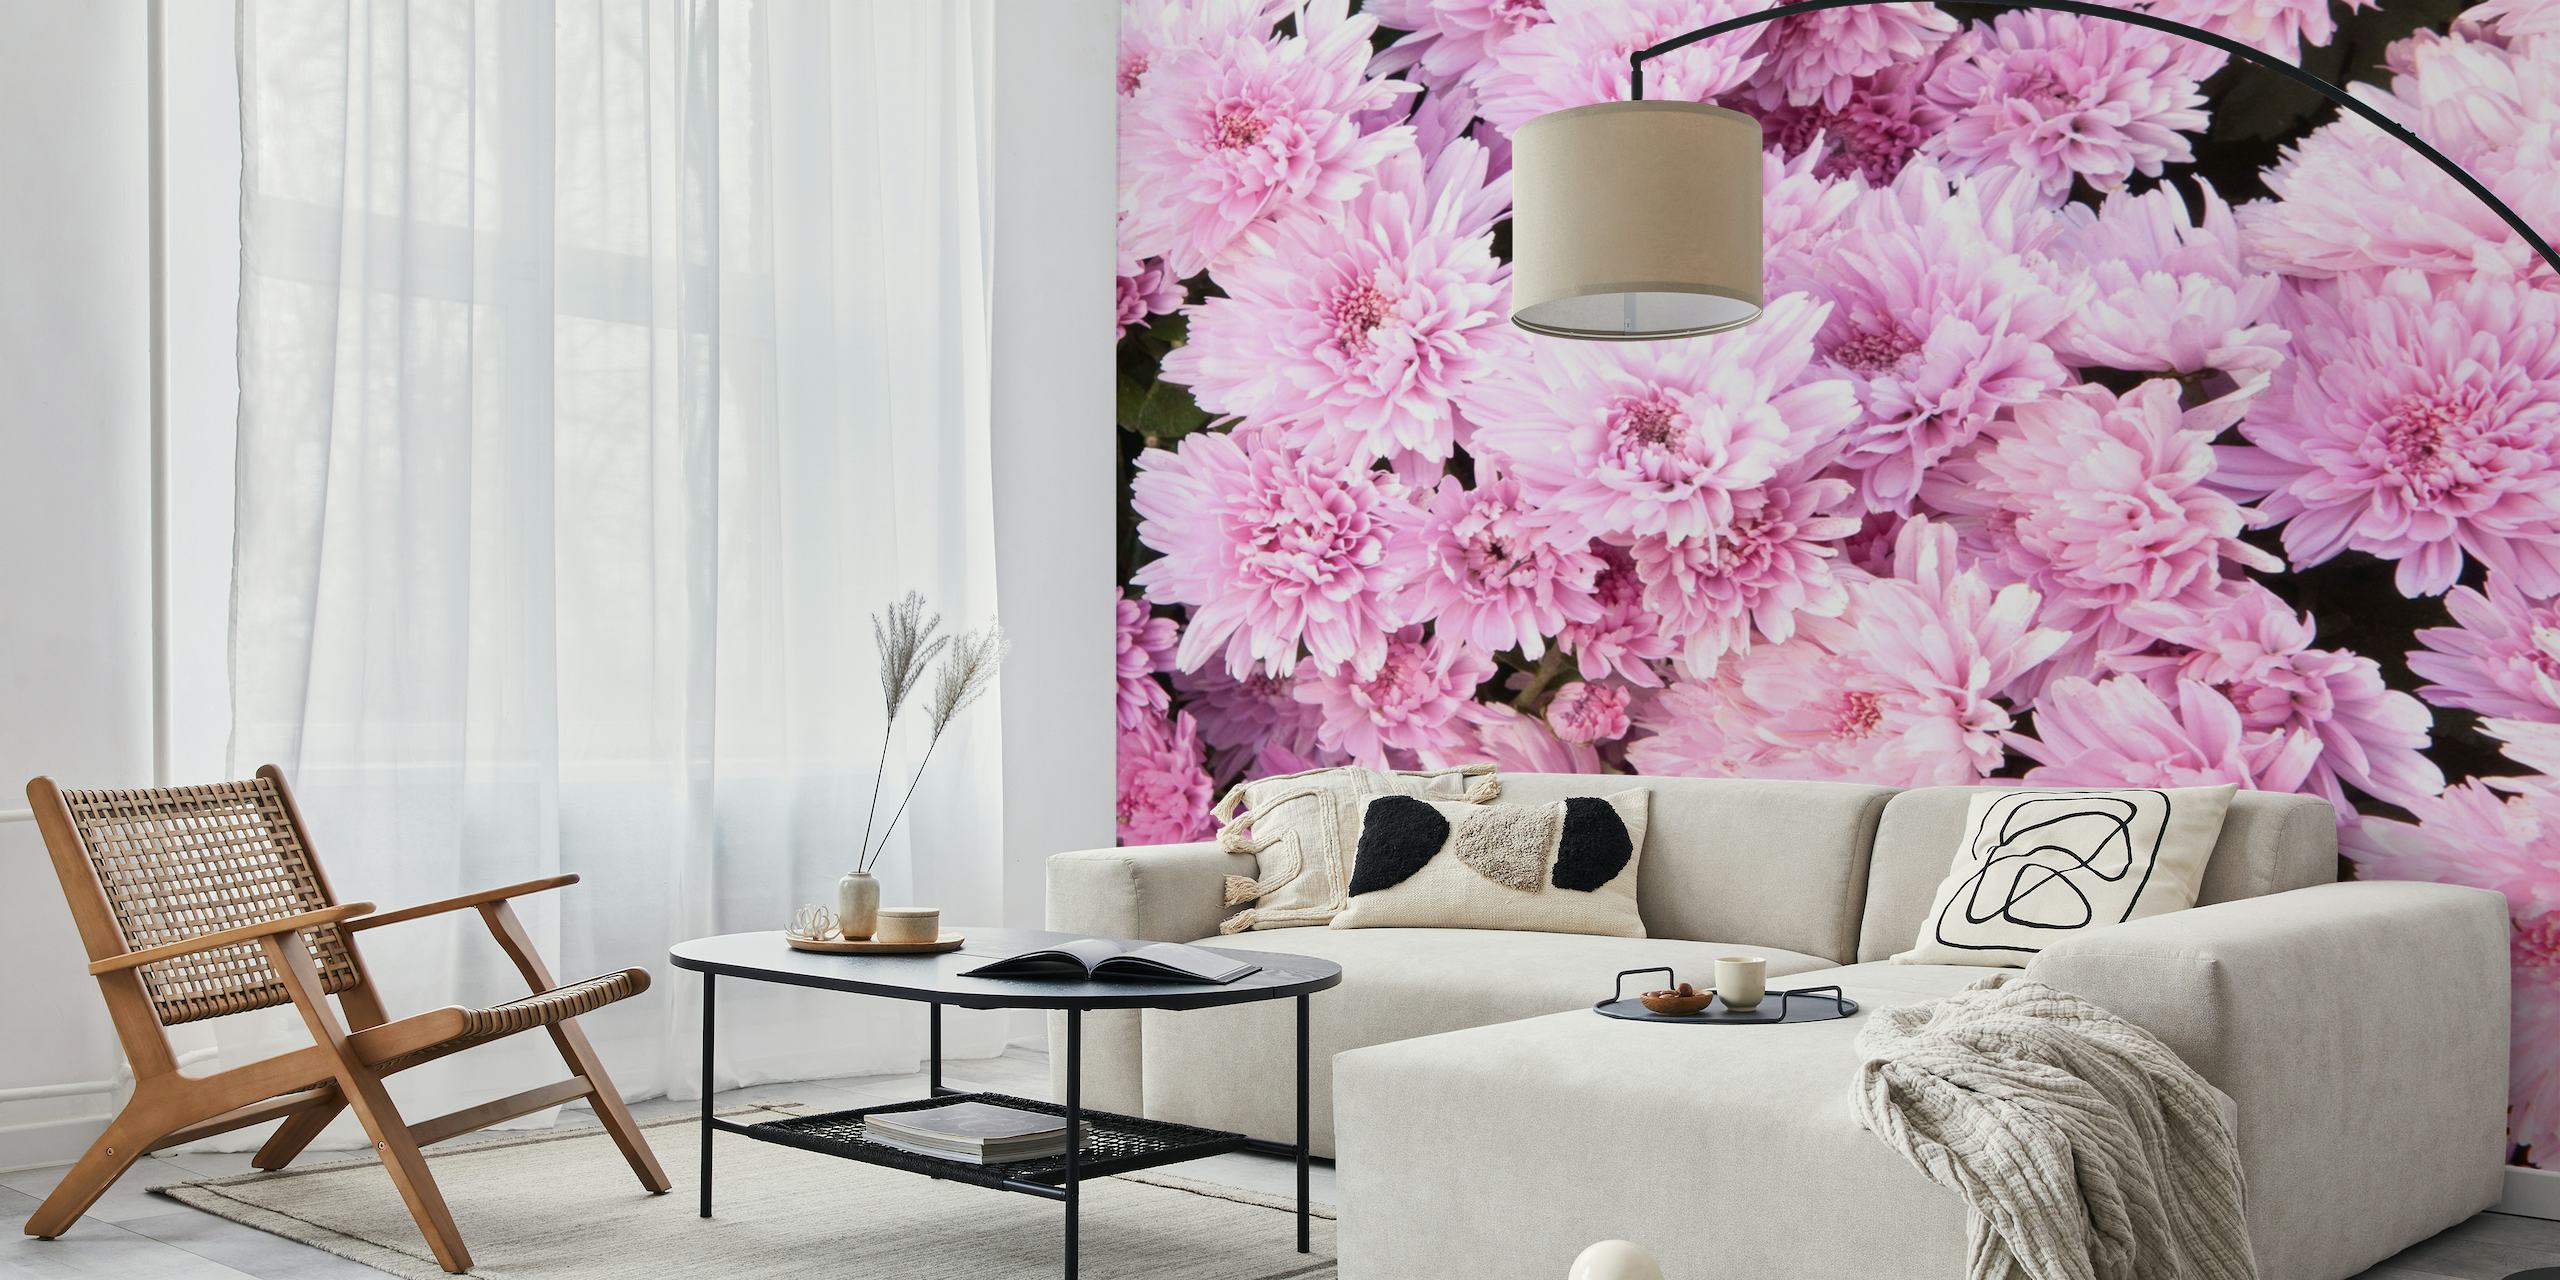 Soft pink chrysanthemum flowers filling the frame, creating a lush floral wall mural